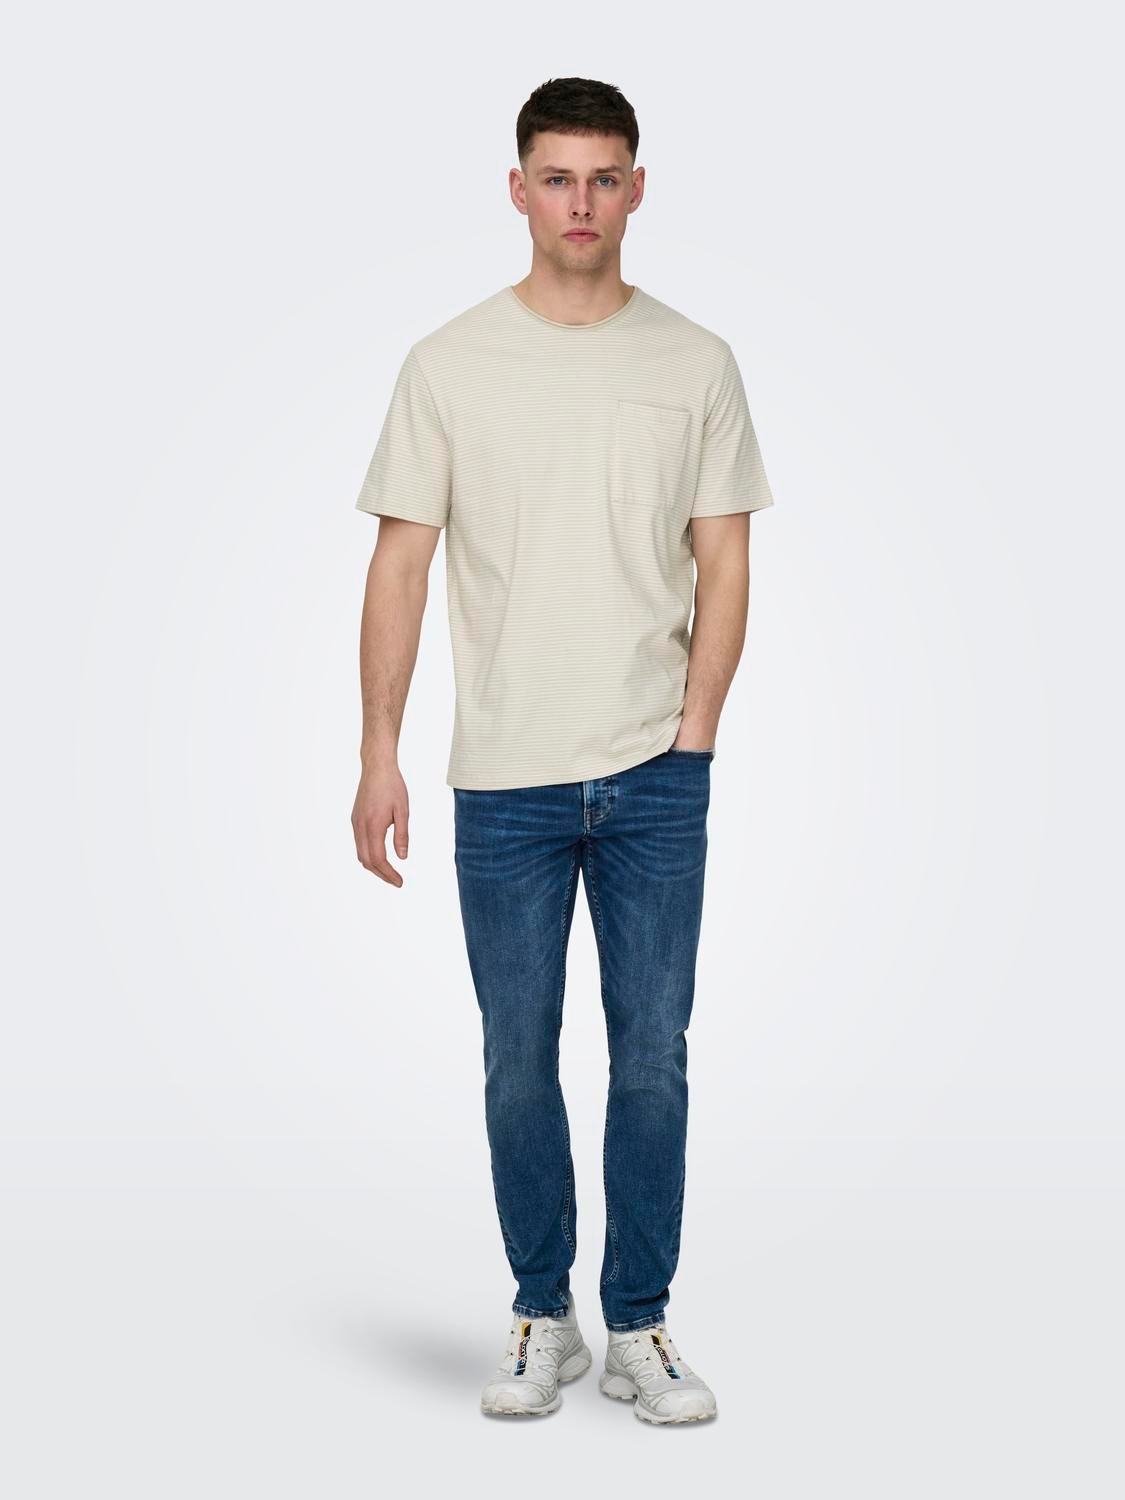 ONLY & SONS Stribet o-hals t-shirt med brystlomme -White - 22025680